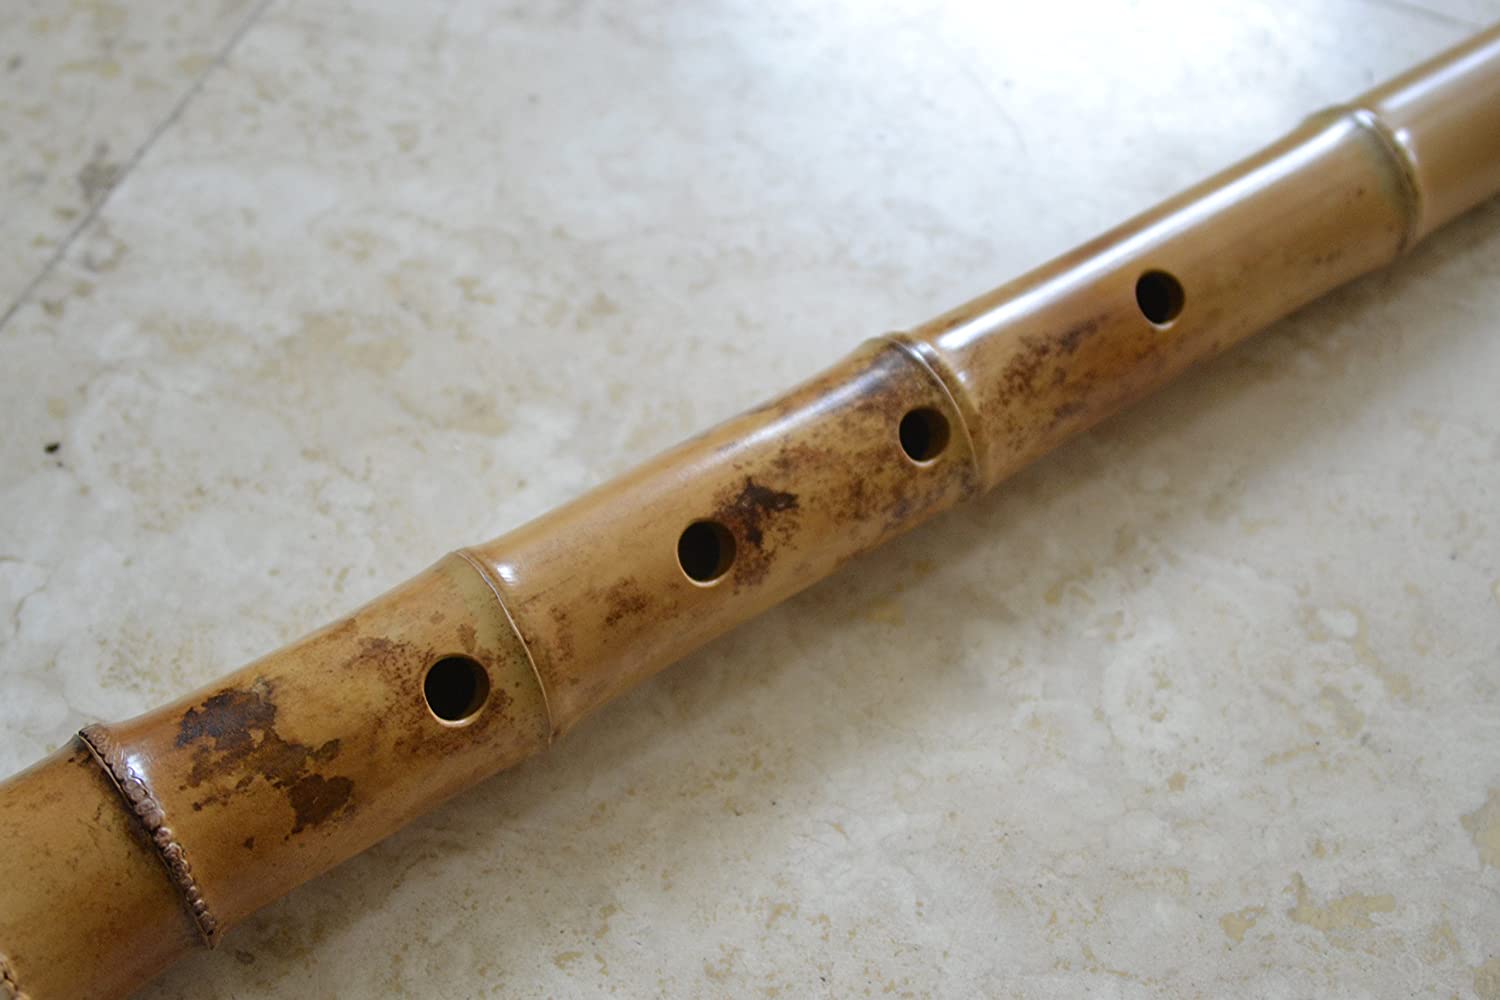 ,000-year-old flutes that can produce the “D” major pentatonic scale discovered in China